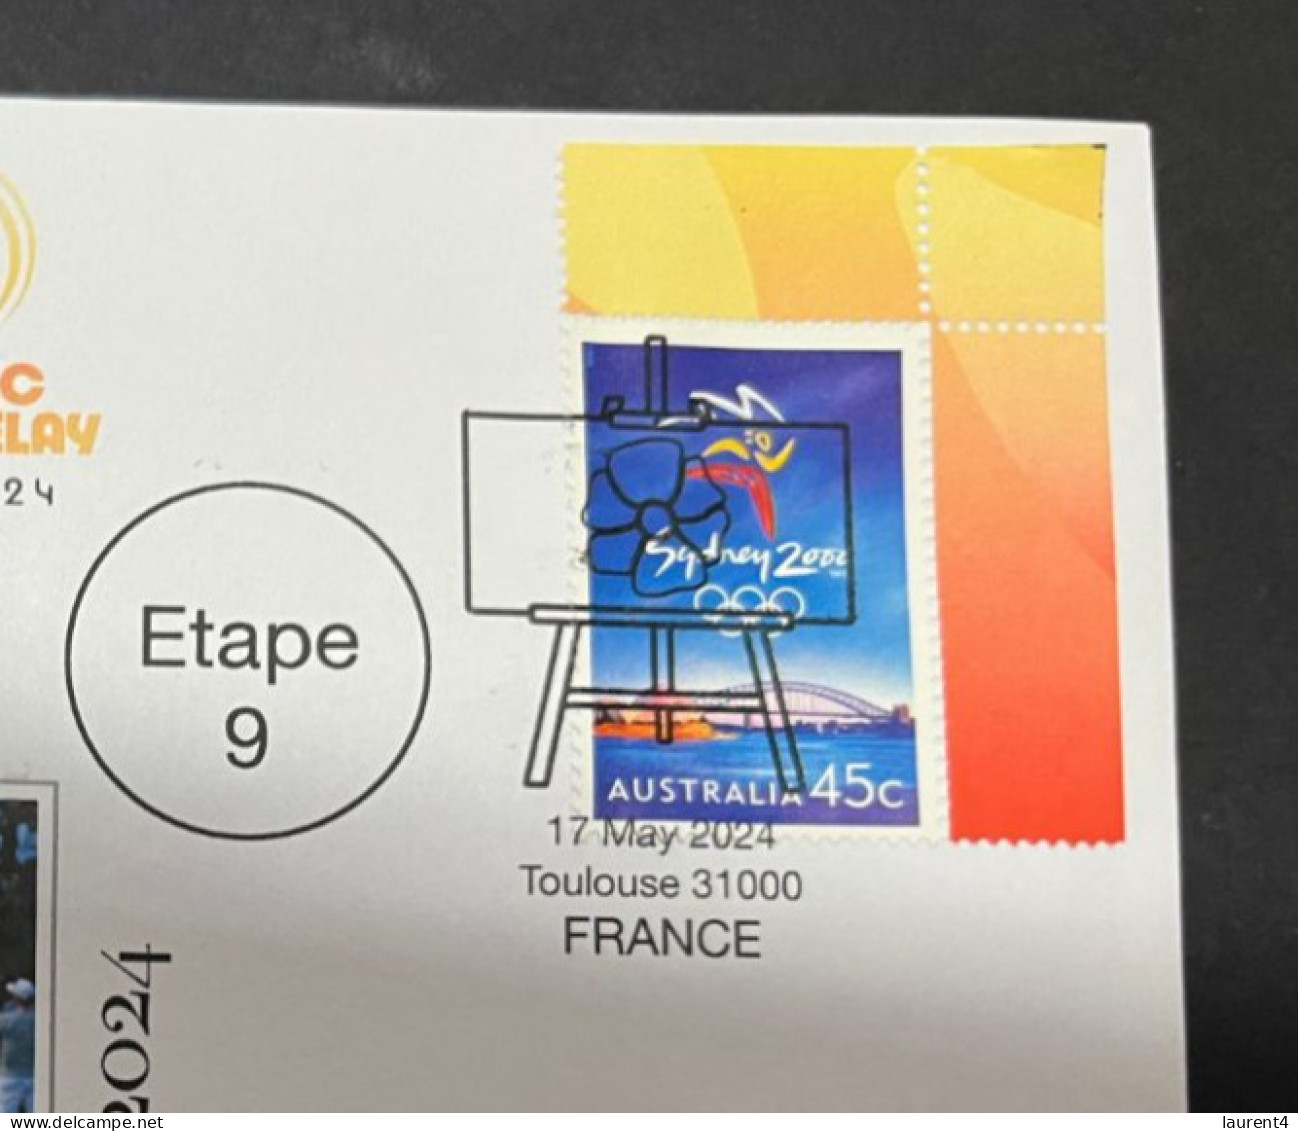 18-5-2024 (5 Z 27) Paris Olympic Games 2024 - Torch Relay (Etape 9) In Toulouse (17-5-2024) With OLYMPIC Stamp - Summer 2024: Paris